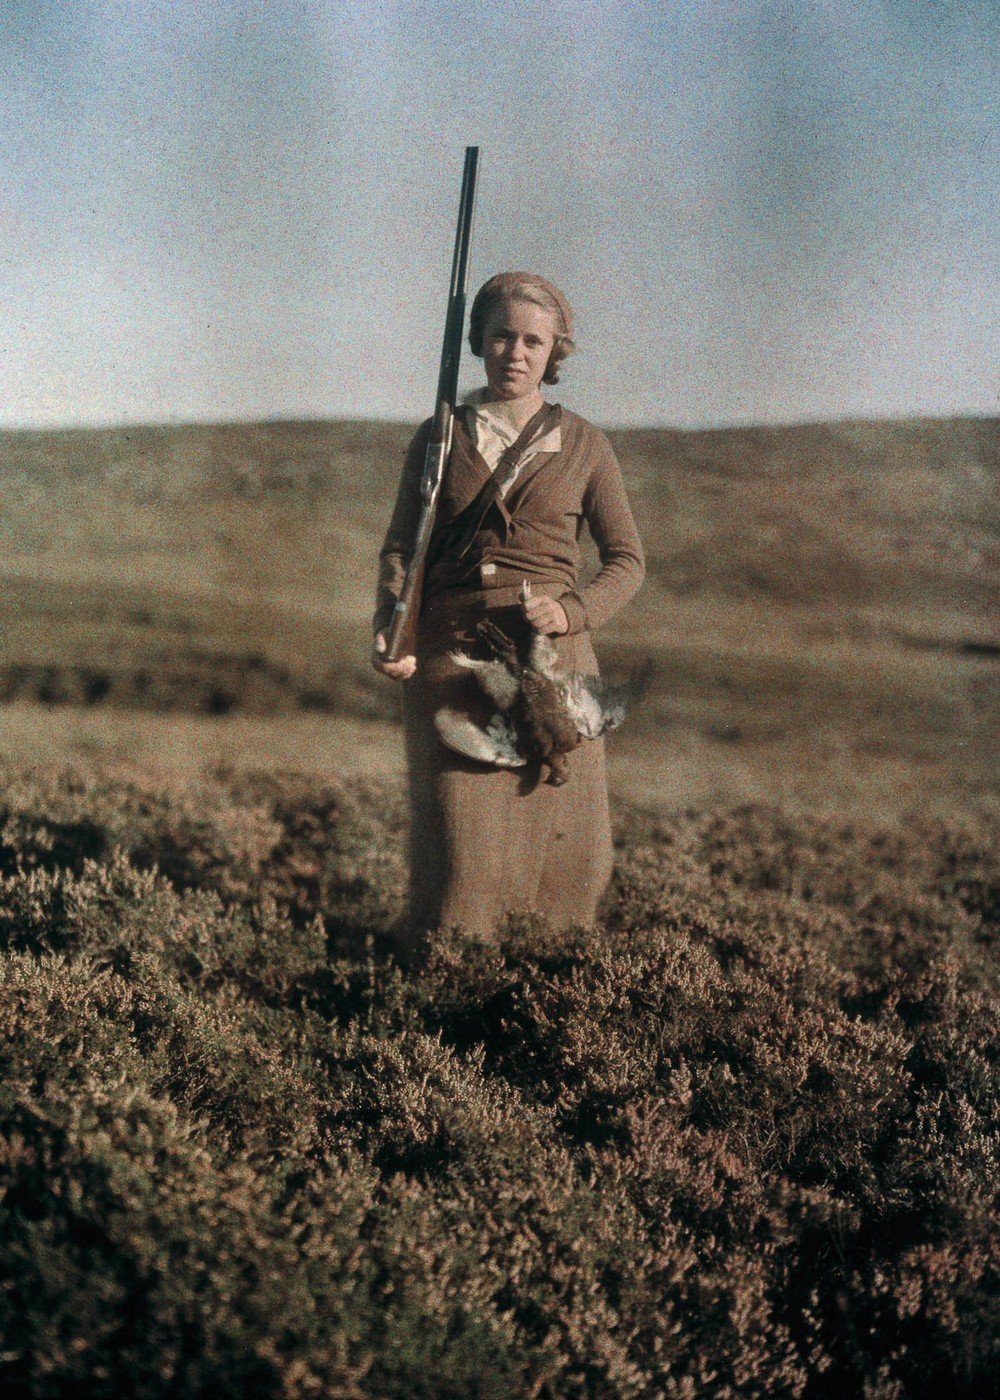 Portrait of a woman hunting, c 1920s.